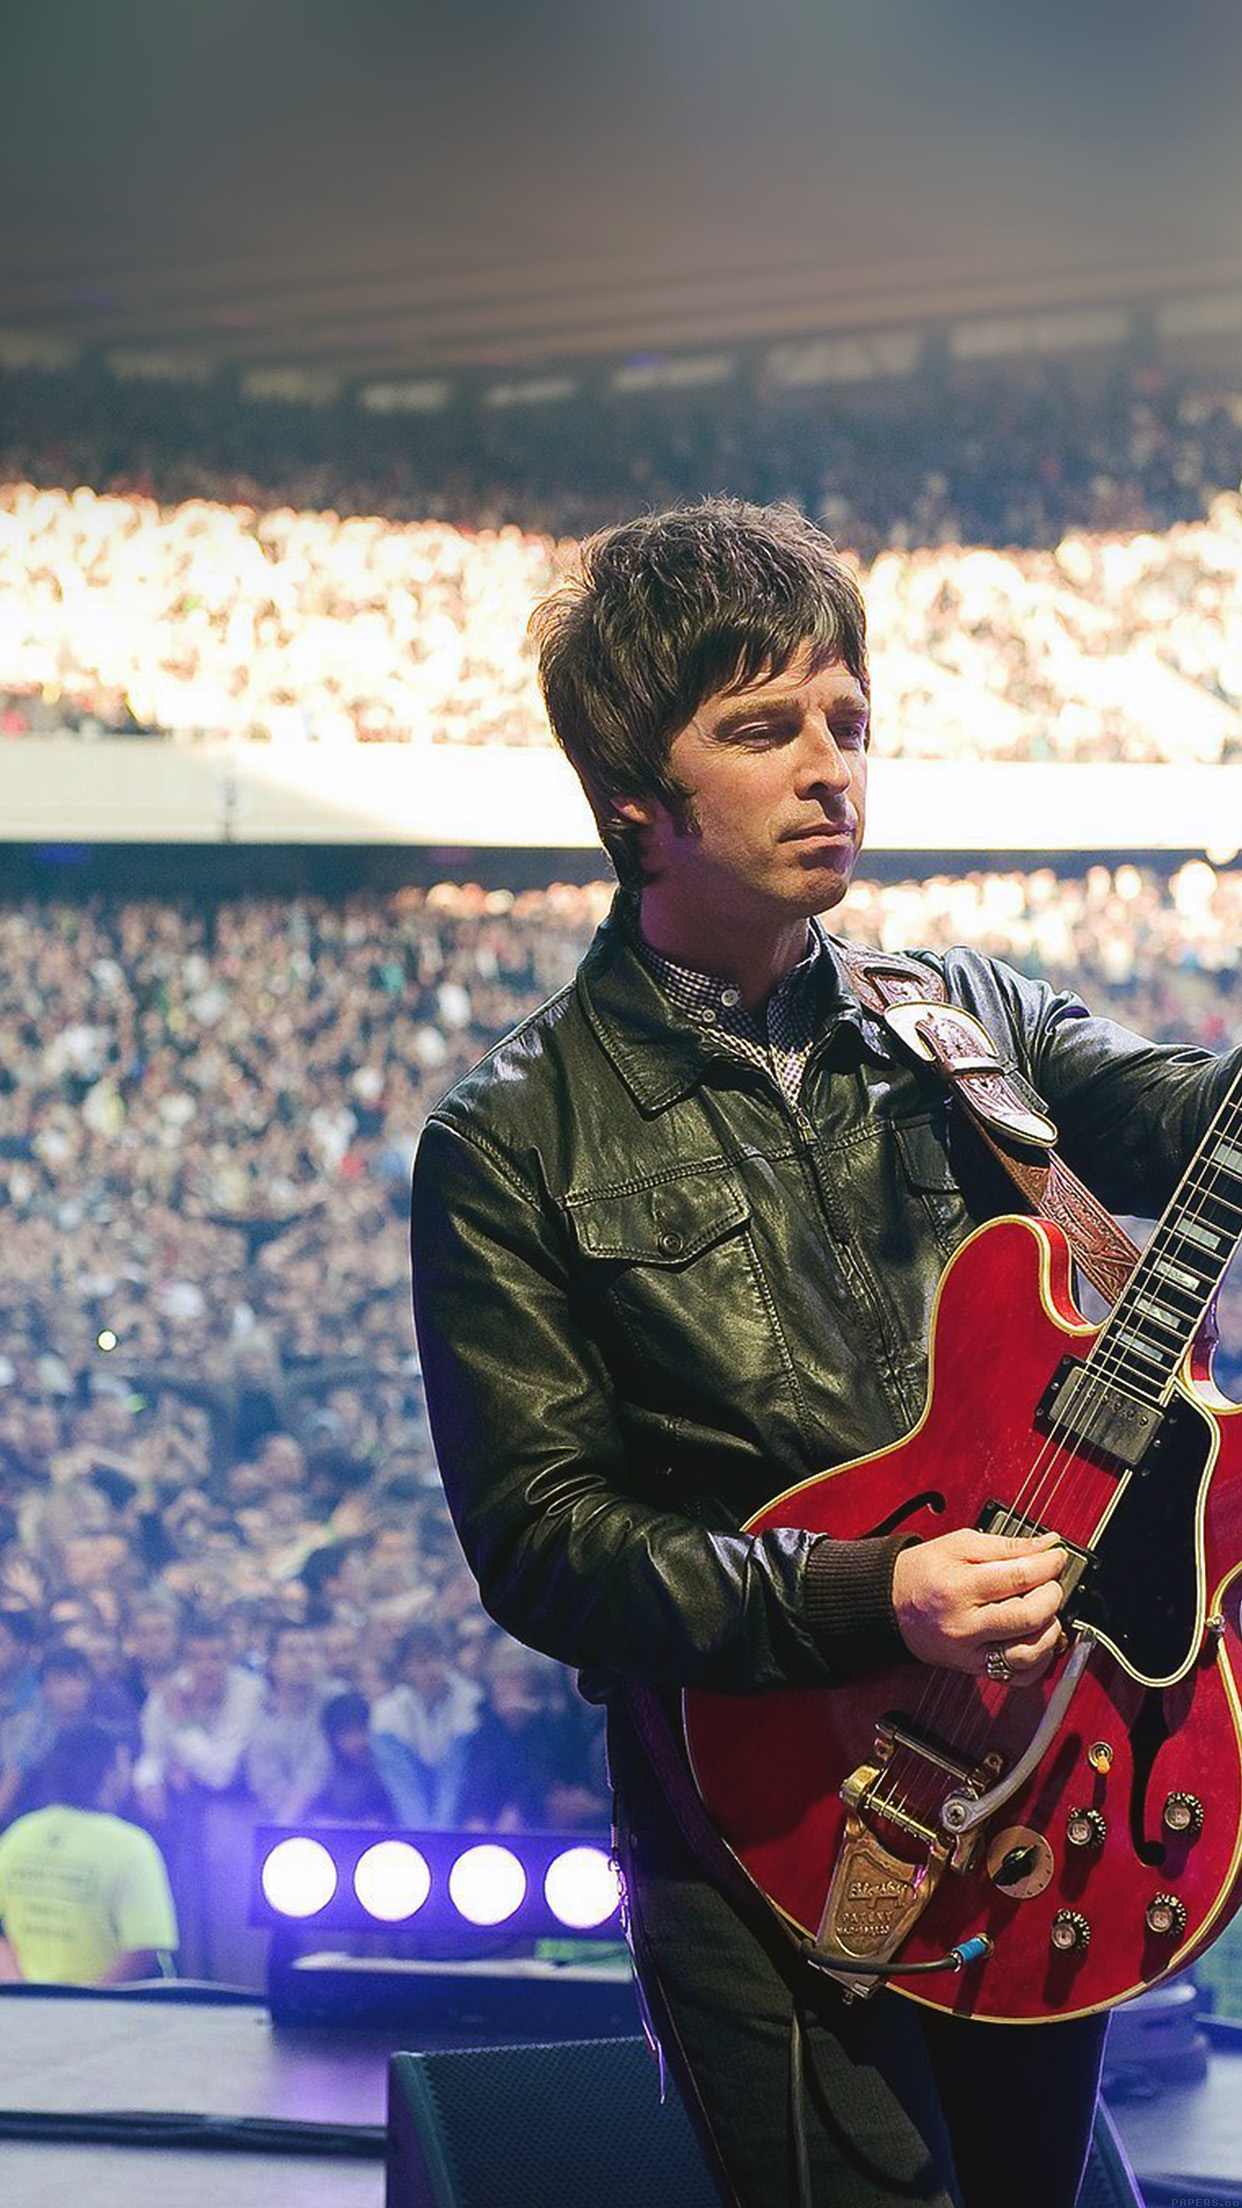 Noel Oasis Music Band Celebrity Android wallpaper